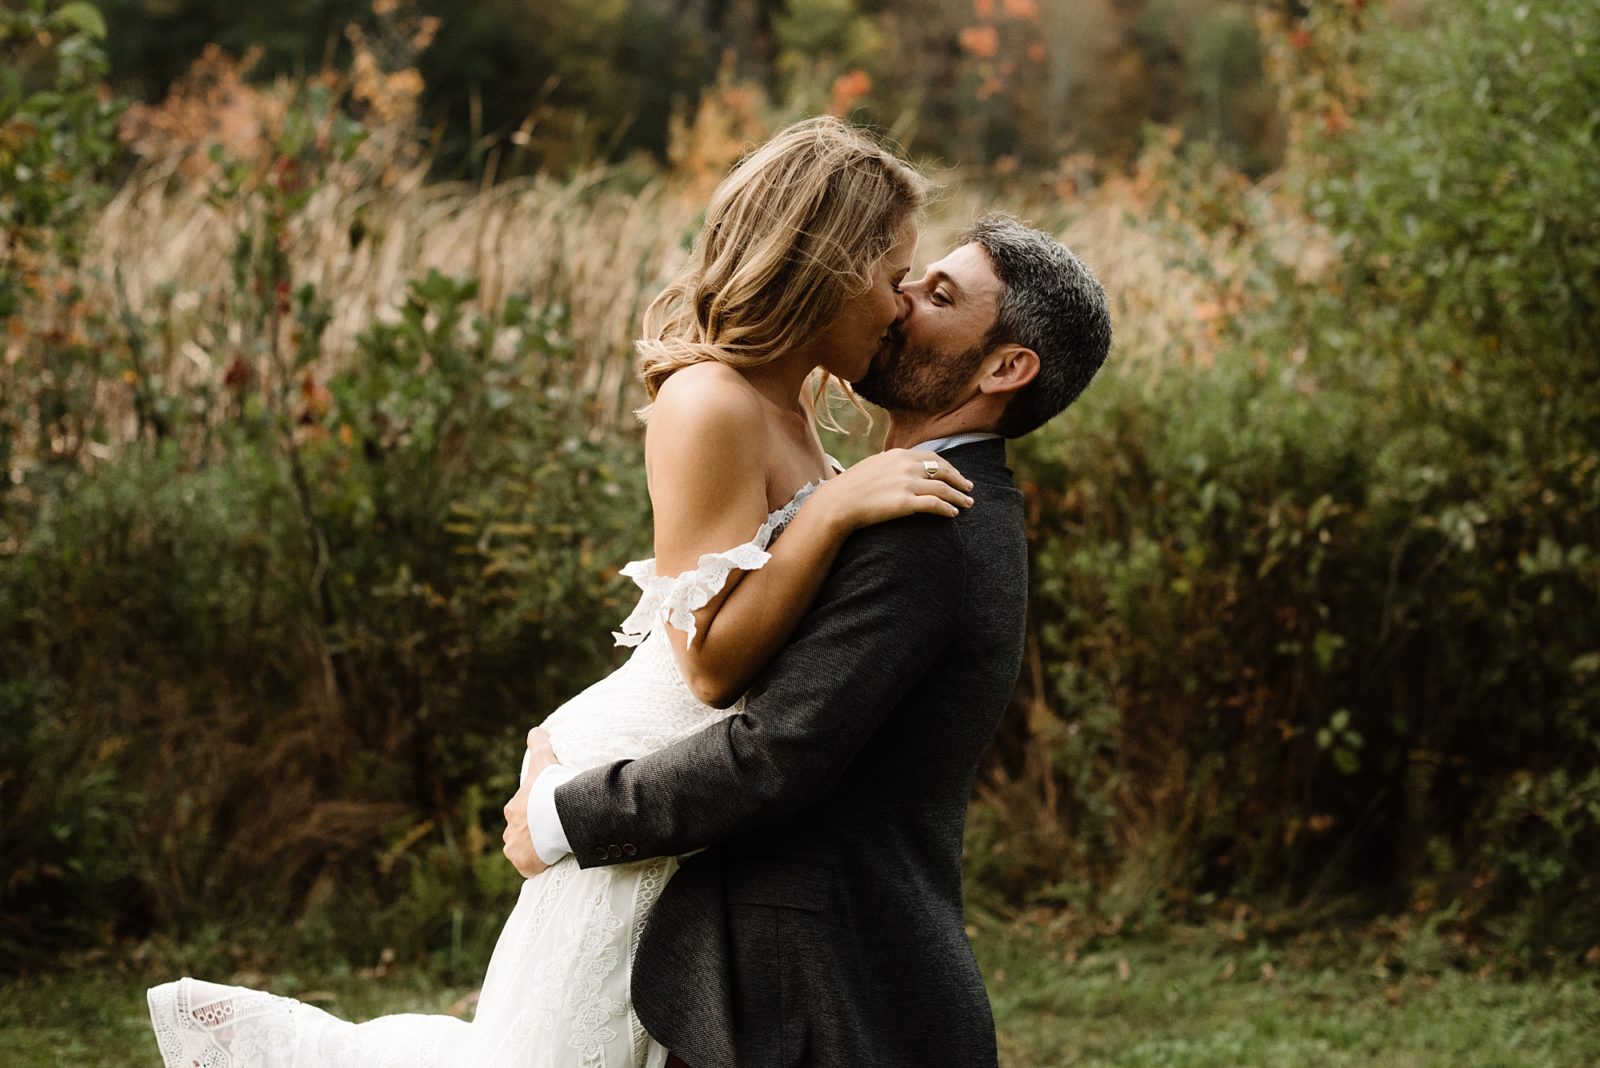 New England bride and groom embracing in front of Fall foliage